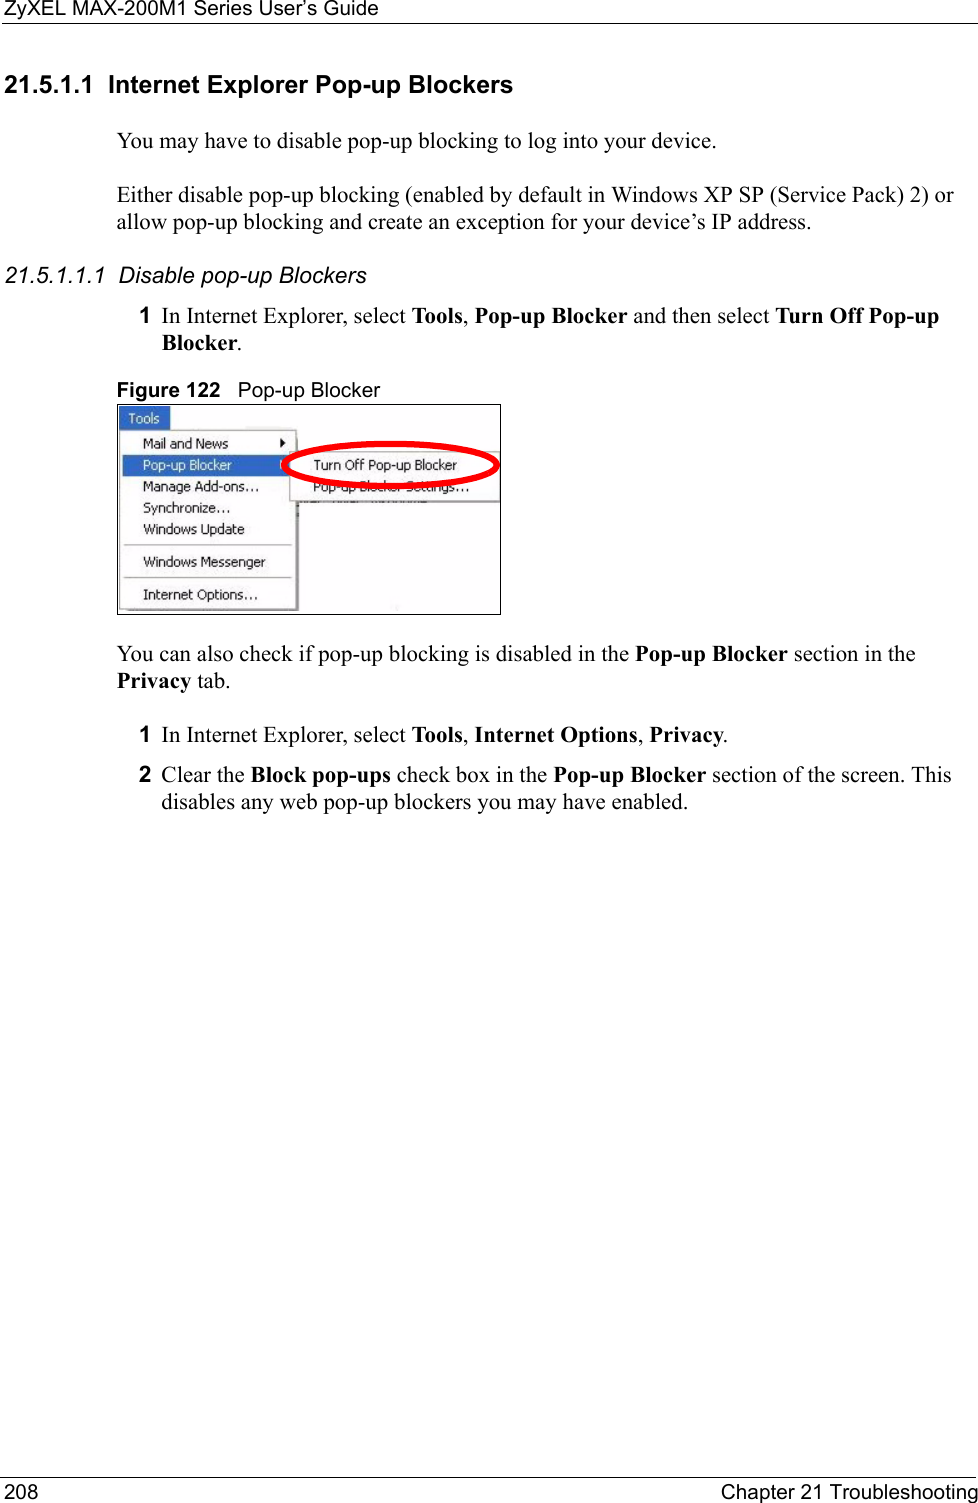 ZyXEL MAX-200M1 Series User’s Guide208 Chapter 21 Troubleshooting21.5.1.1  Internet Explorer Pop-up BlockersYou may have to disable pop-up blocking to log into your device. Either disable pop-up blocking (enabled by default in Windows XP SP (Service Pack) 2) or allow pop-up blocking and create an exception for your device’s IP address.21.5.1.1.1  Disable pop-up Blockers1In Internet Explorer, select Tool s , Pop-up Blocker and then select Turn Off Pop-up Blocker. Figure 122   Pop-up BlockerYou can also check if pop-up blocking is disabled in the Pop-up Blocker section in the Privacy tab. 1In Internet Explorer, select Tool s , Internet Options, Privacy.2Clear the Block pop-ups check box in the Pop-up Blocker section of the screen. This disables any web pop-up blockers you may have enabled. 